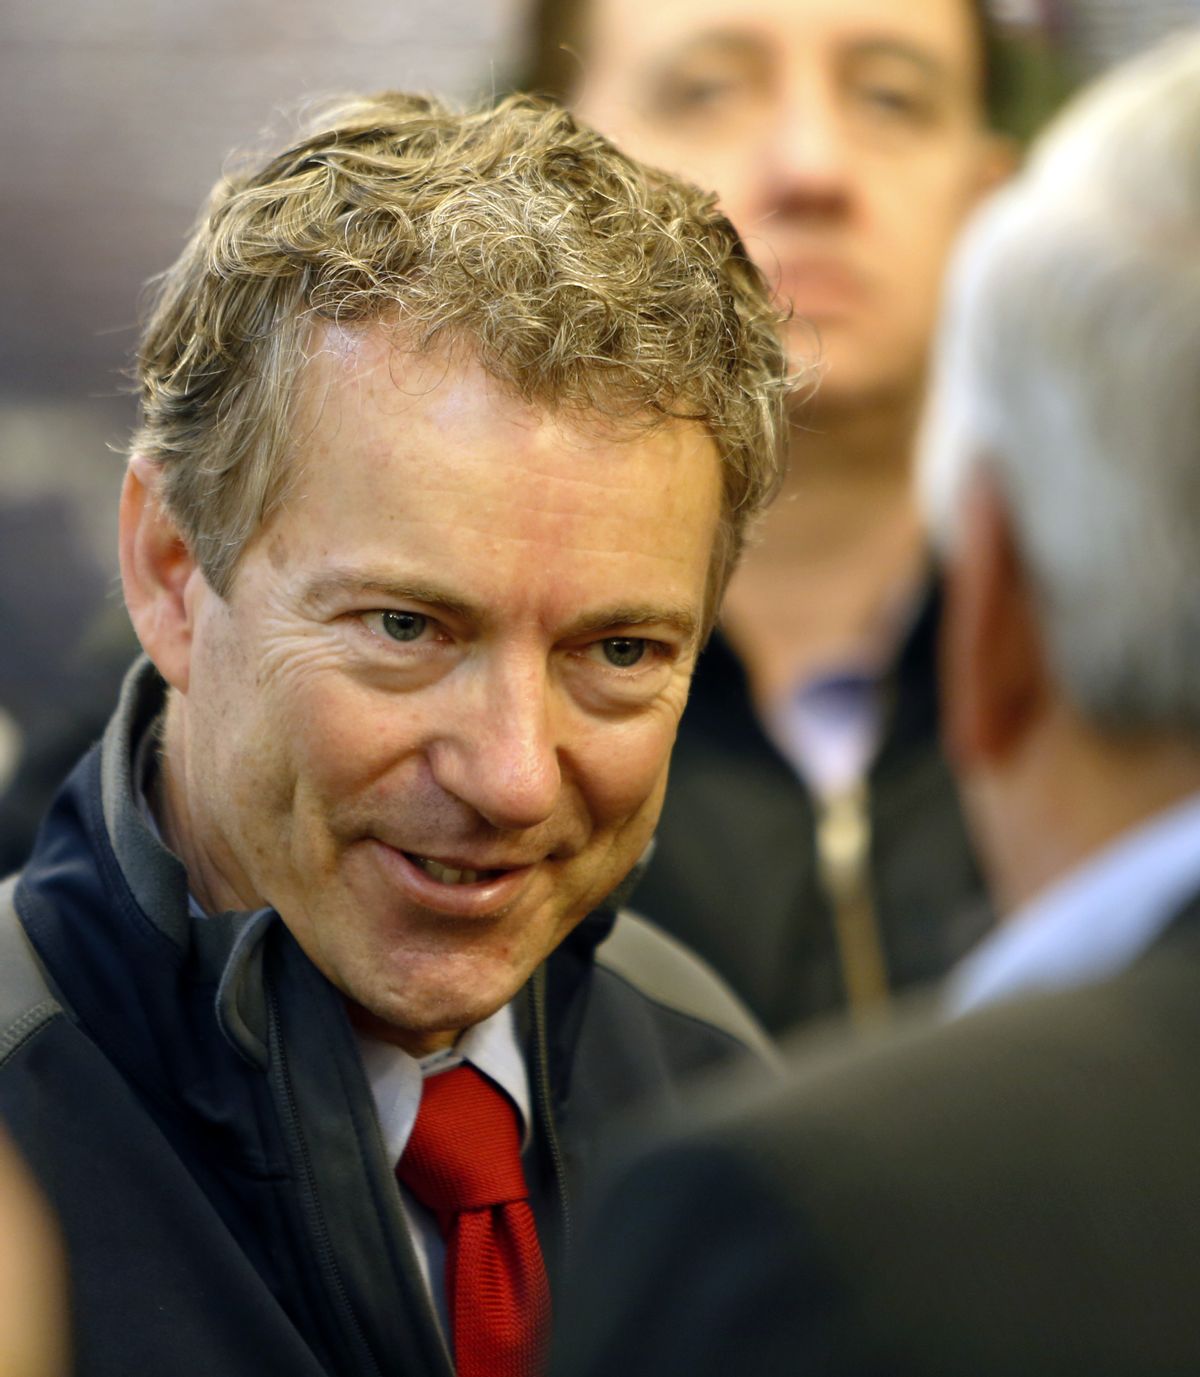 U.S. Sen. Rand Paul, R-Ky., meets with members of the Londonderry Fish and Game Club, Wednesday, Jan. 14, 2015, in Litchfield, N.H. (AP/Jim Cole)